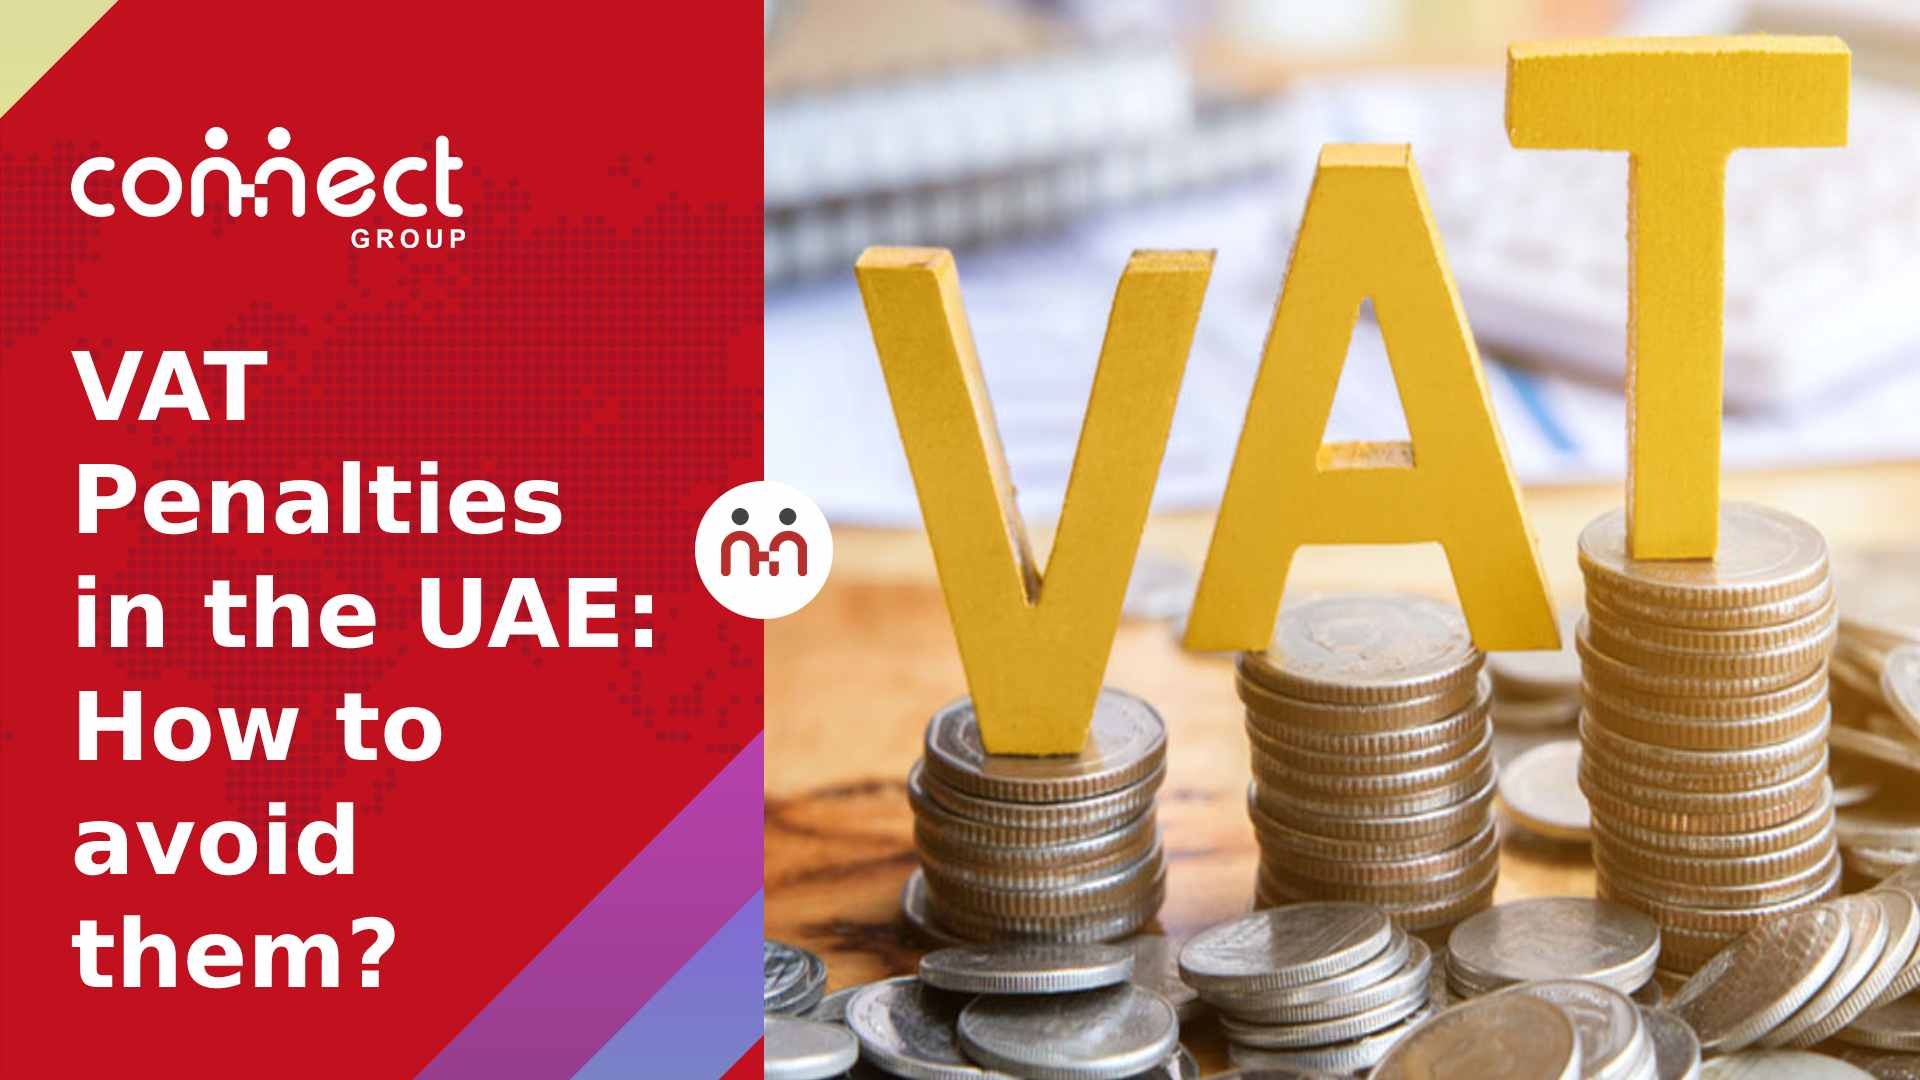 VAT Penalties in the UAE: How to avoid them?